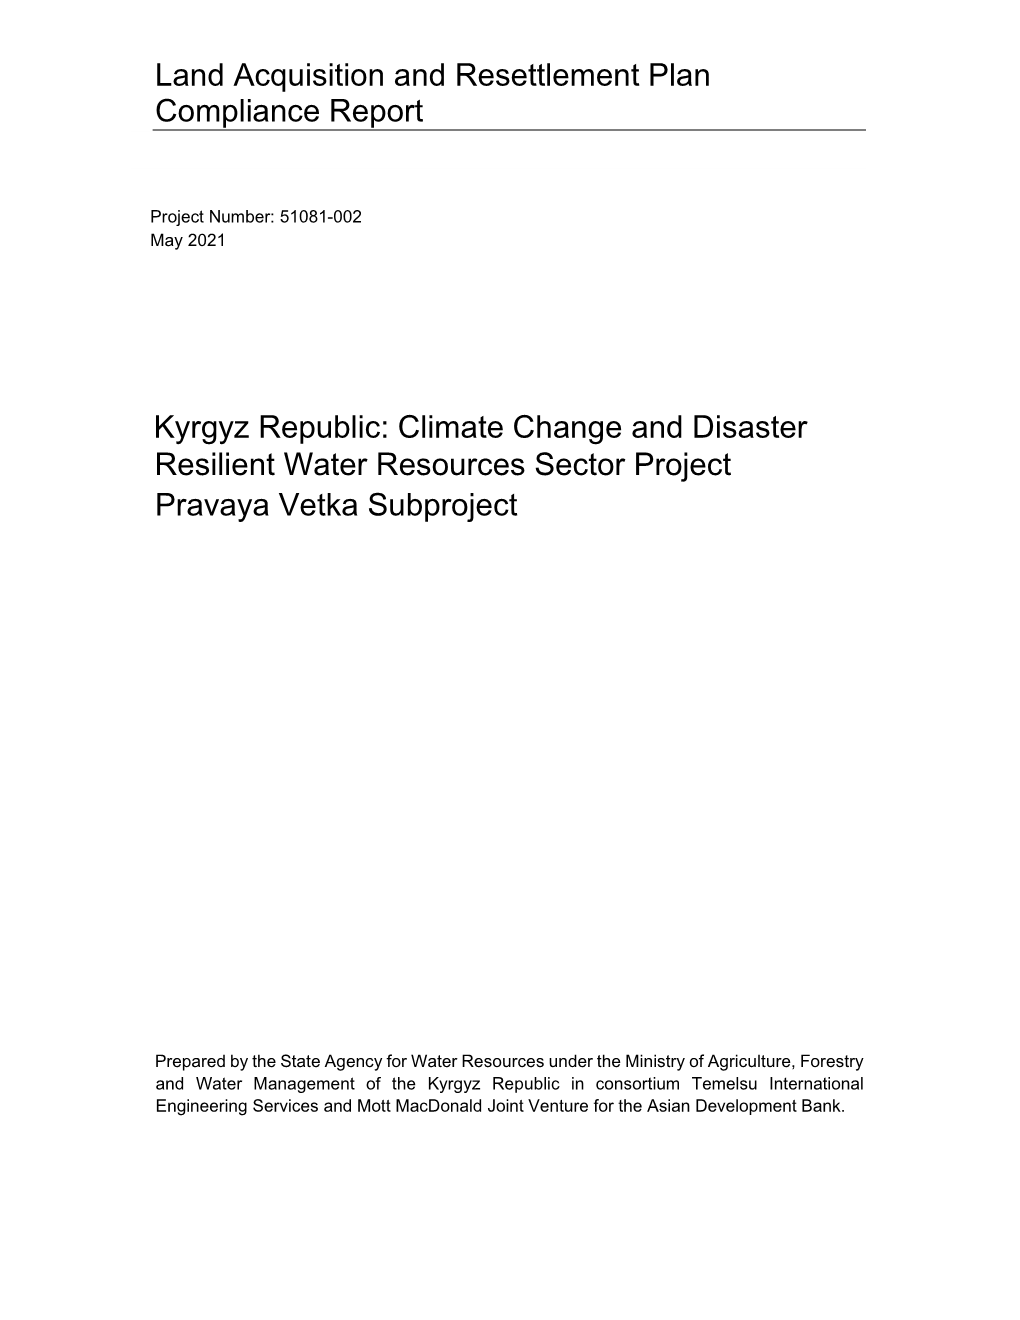 Land Acquisition and Resettlement Plan Compliance Report Kyrgyz Republic: Climate Change and Disaster Resilient Water Resources